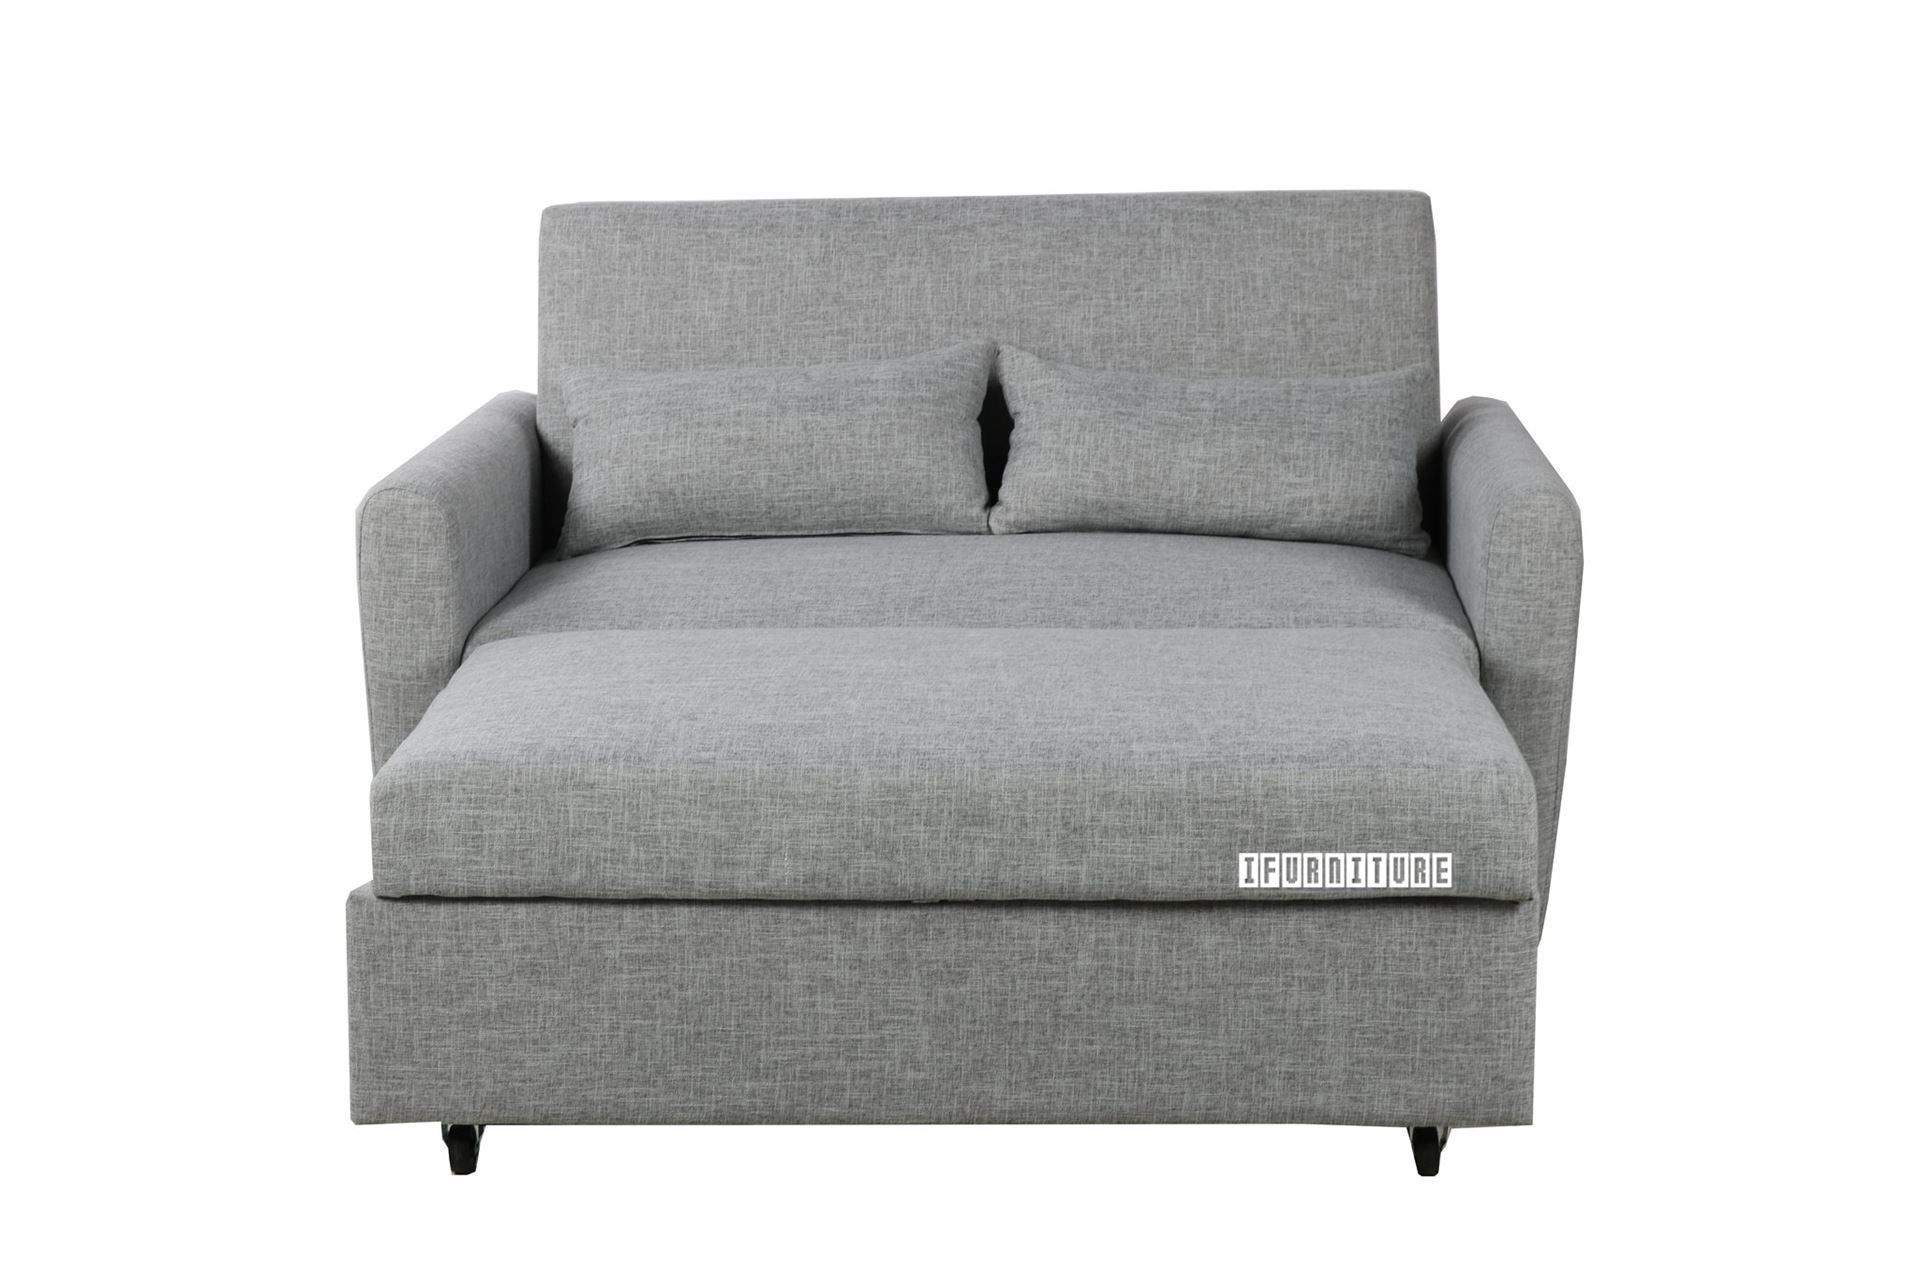 Primo Pull Out 2 Seater Sofa Bed (grey) Pertaining To 2 In 1 Gray Pull Out Sofa Beds (View 4 of 20)